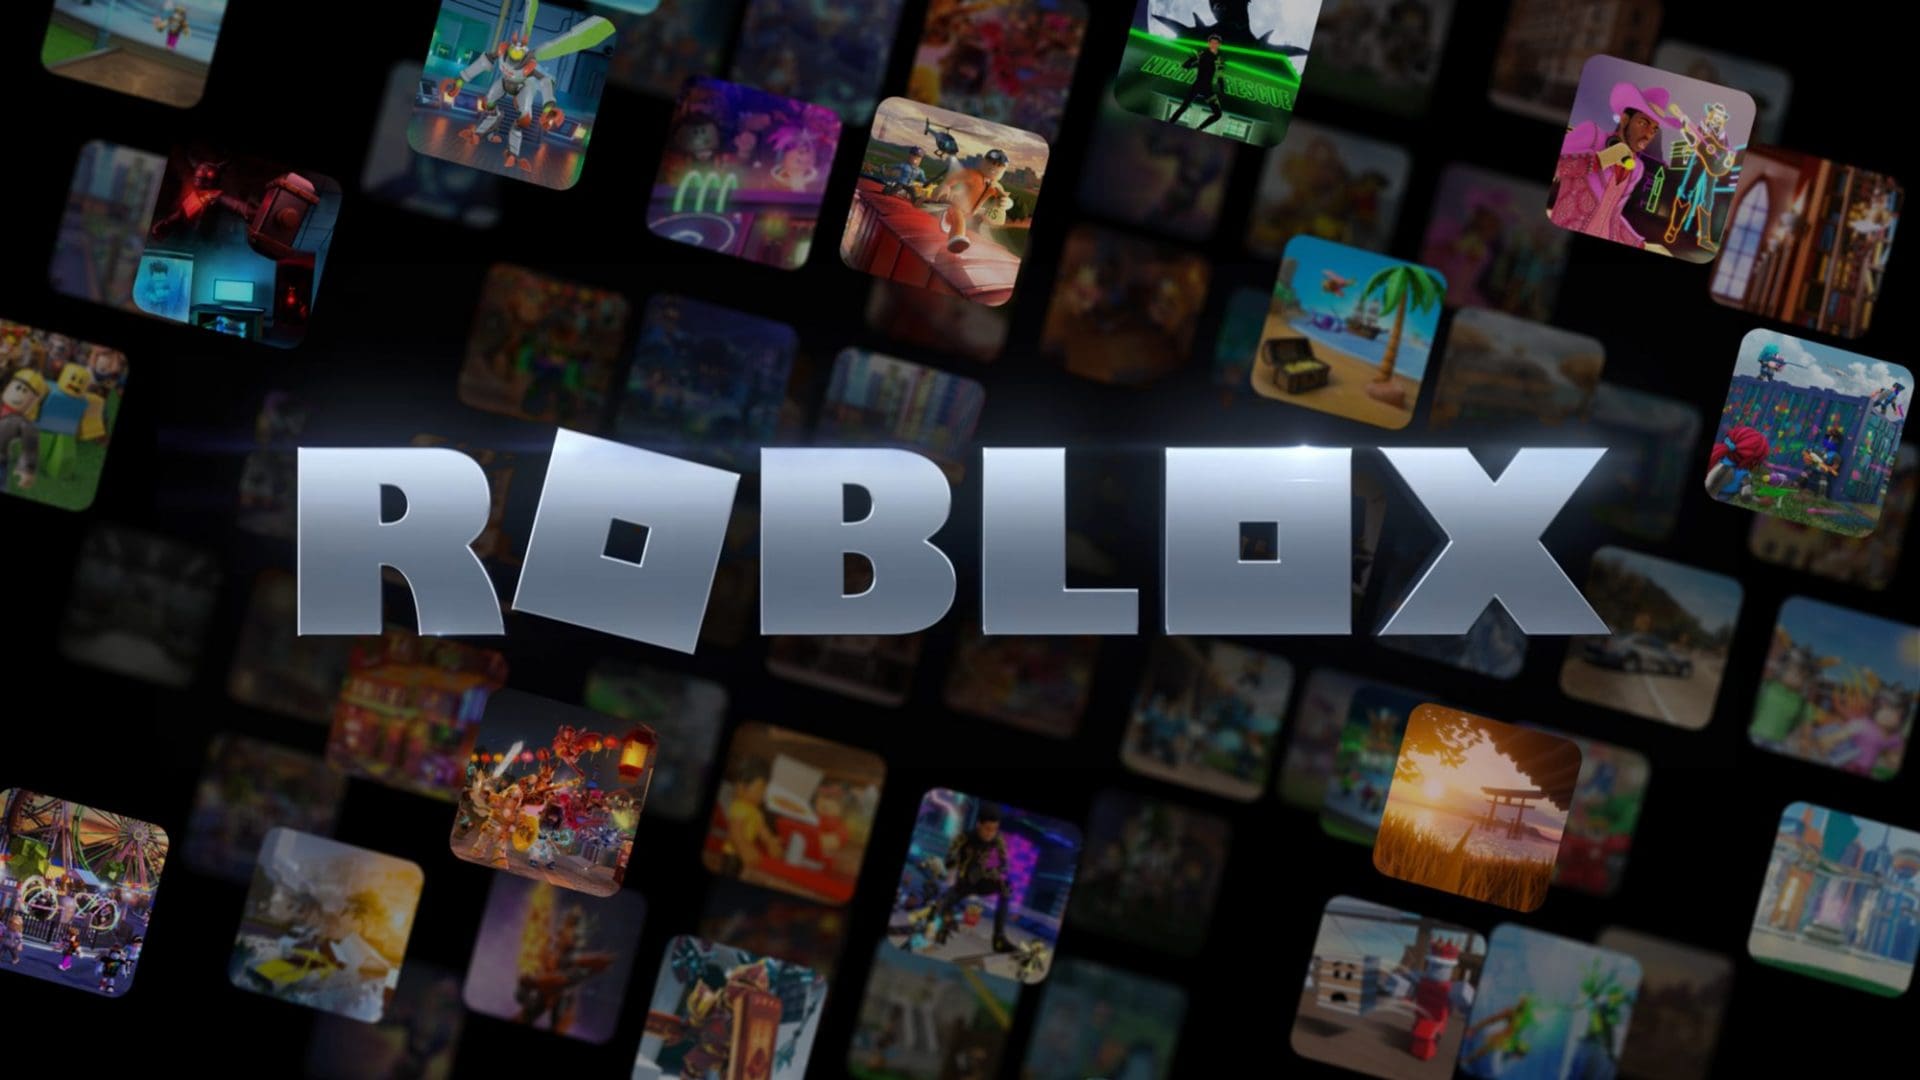 Roblox CEO says its being gentle on monetization compared to user growth